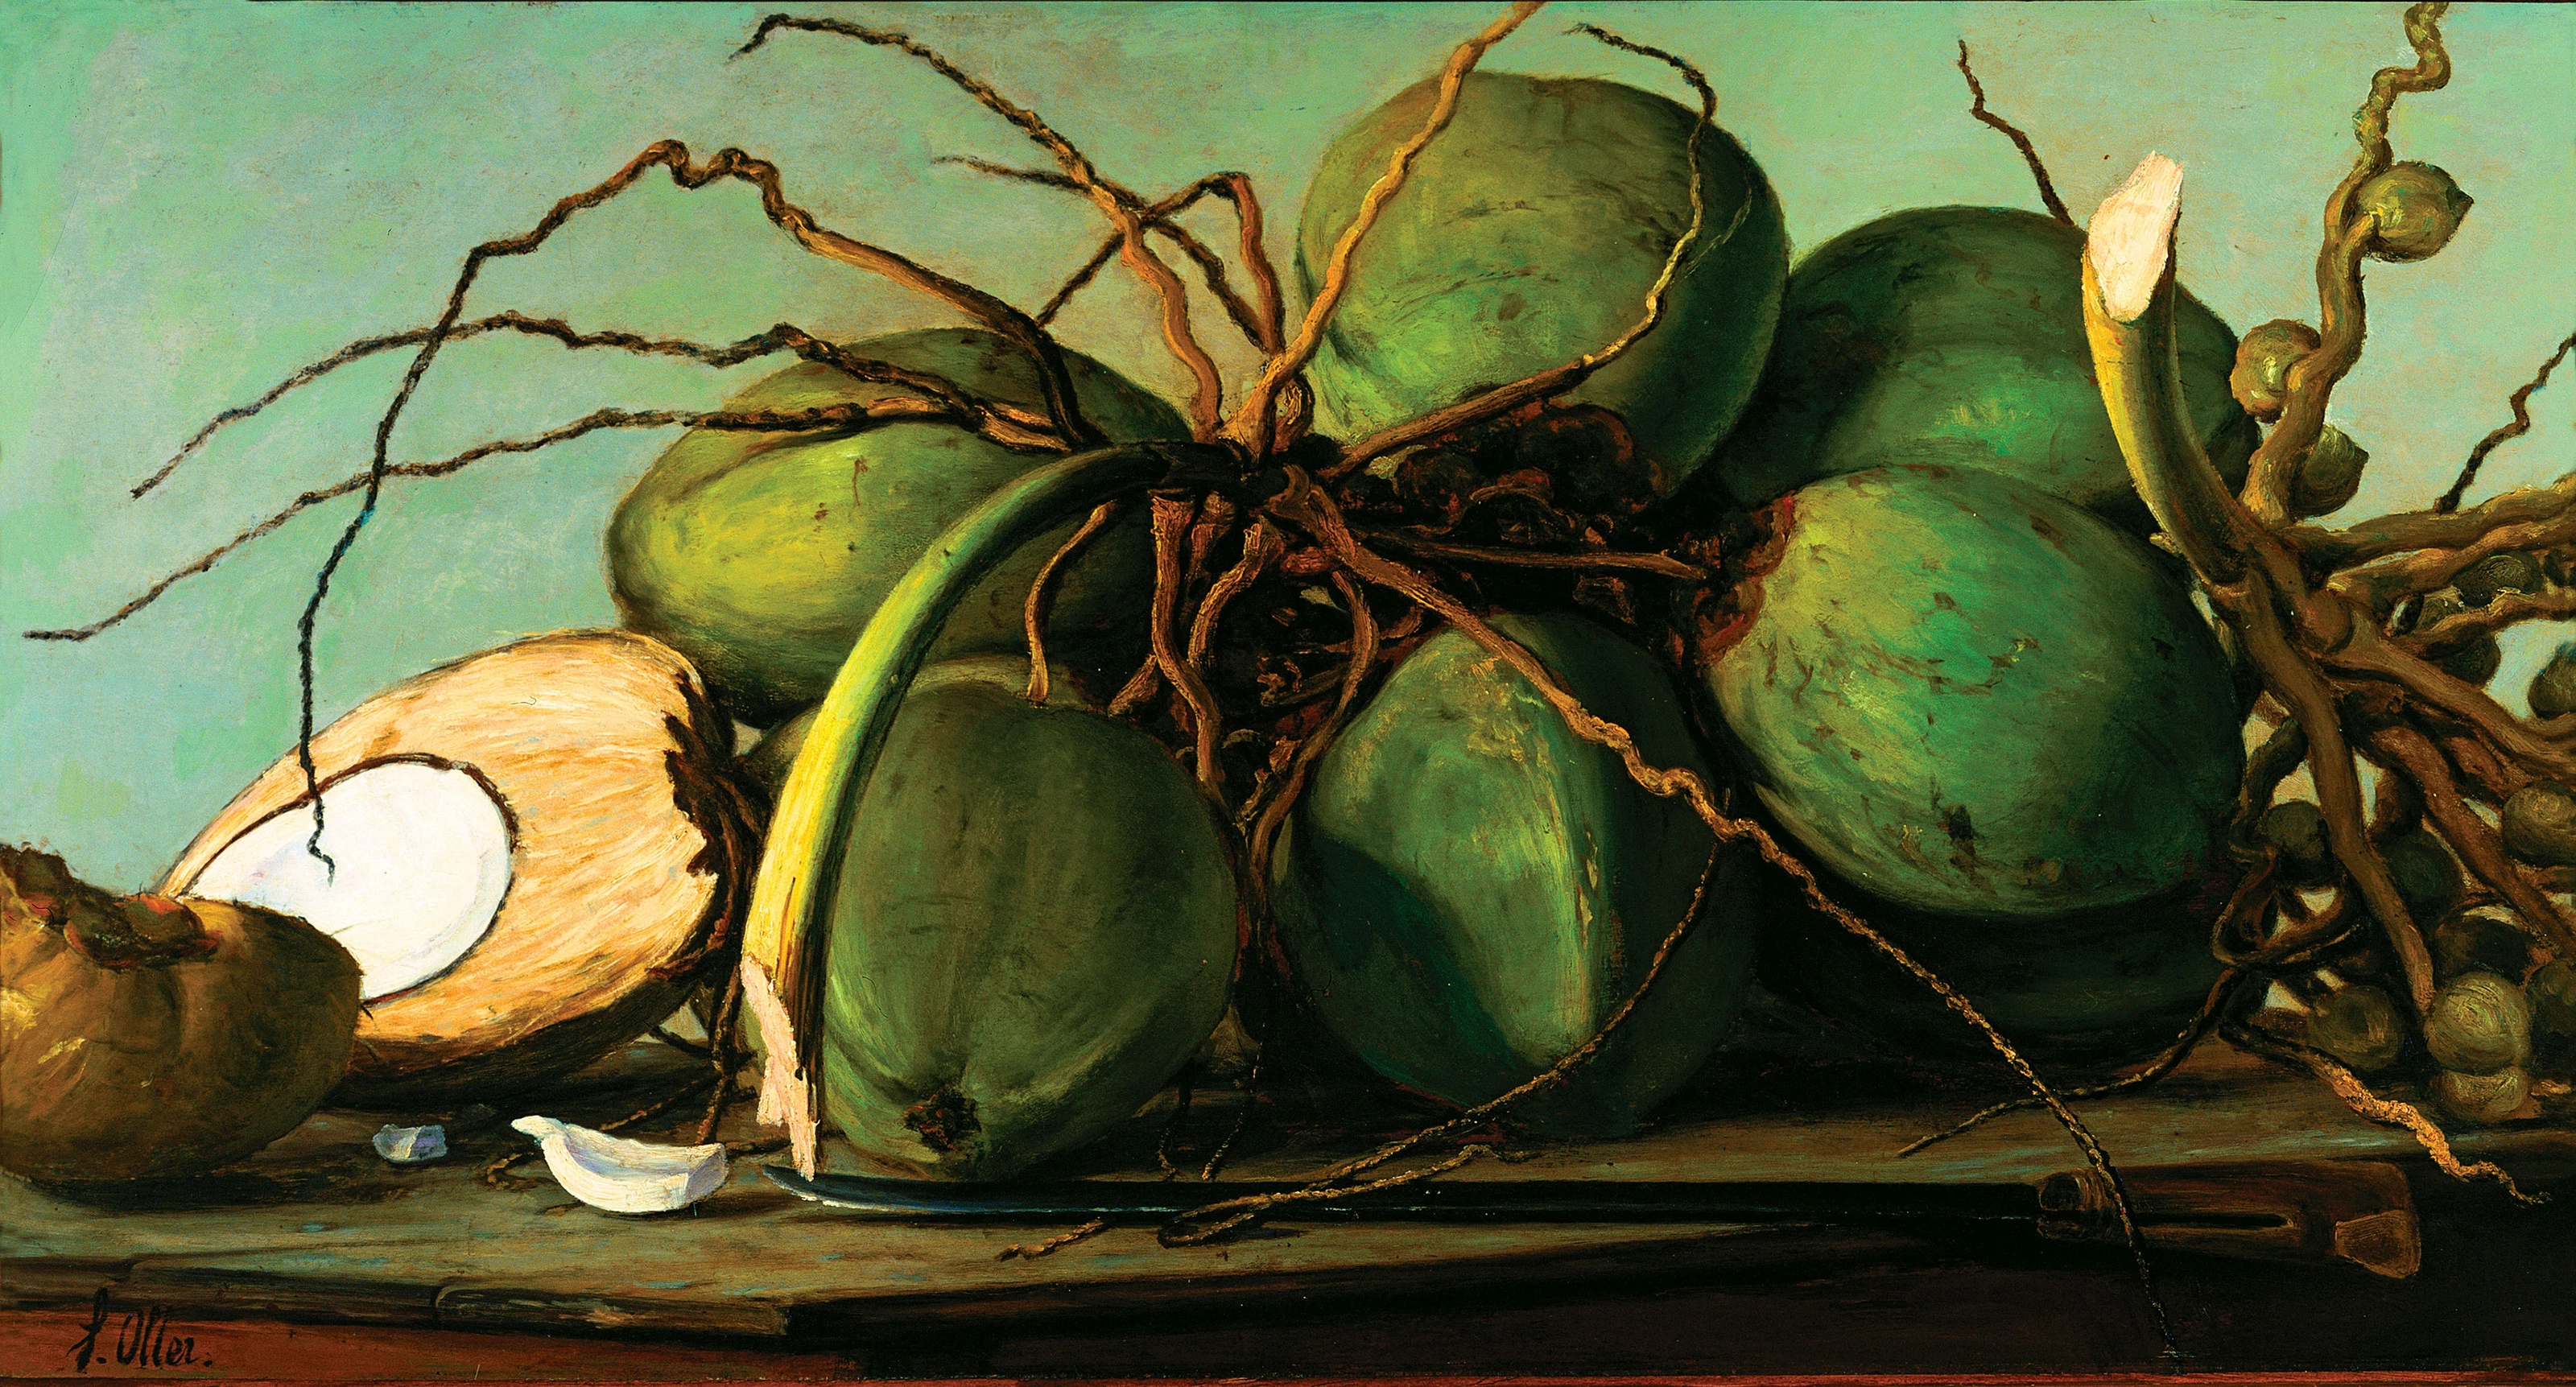 Still Life with Coconuts, Francisco Oller